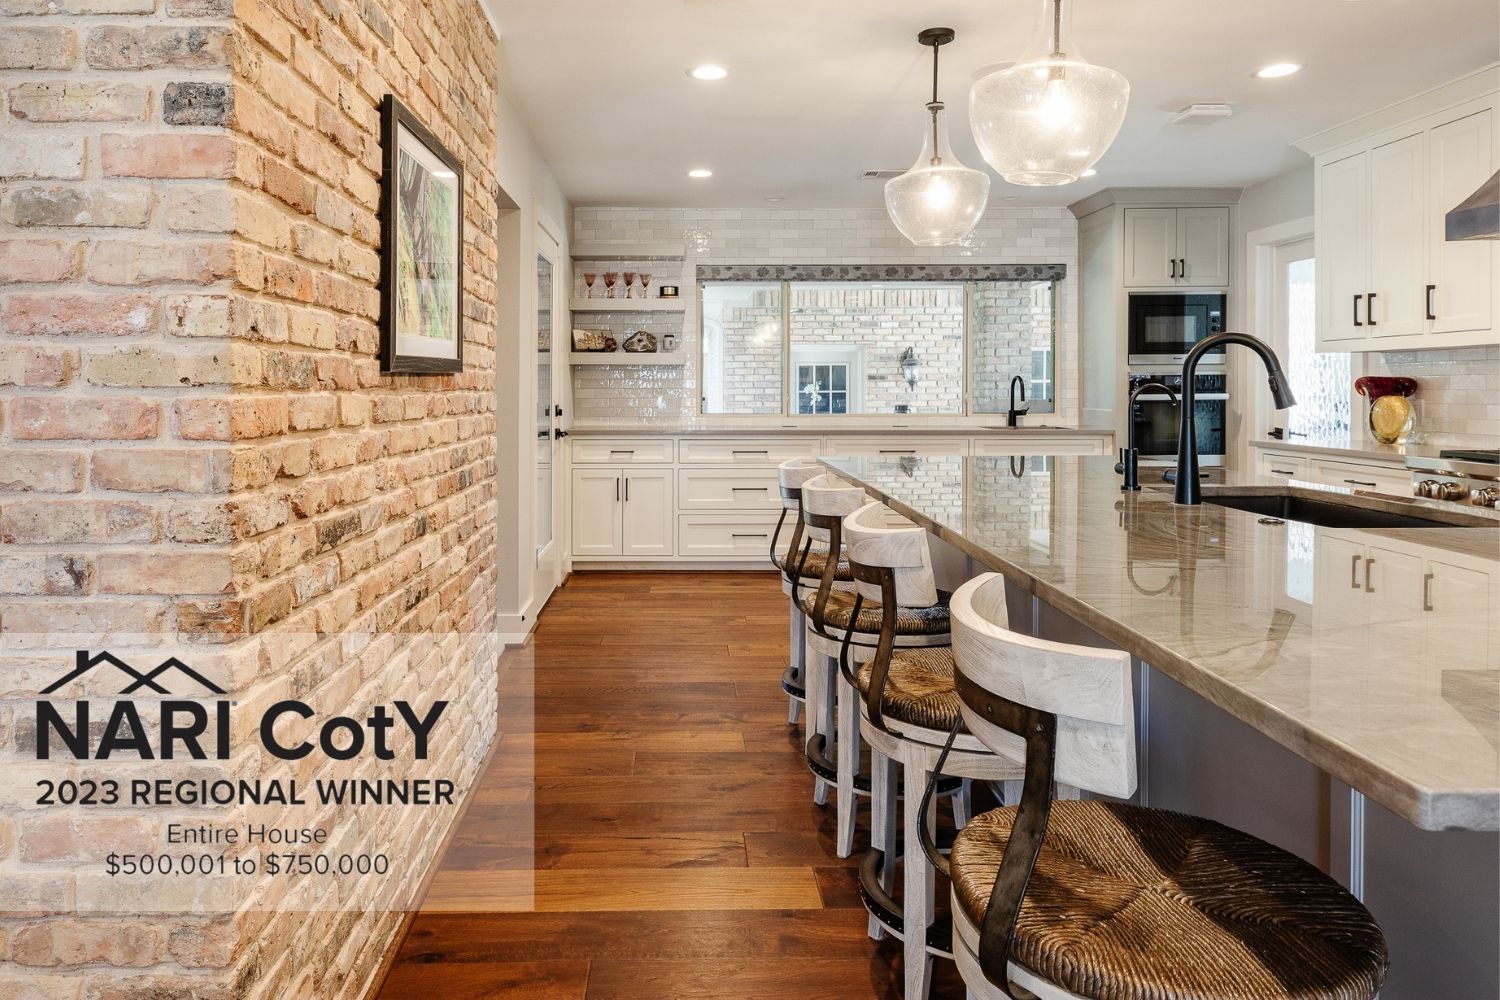 The National Association of the Remodeling Industry (NARI) 2023 Regional CotY Award Winner